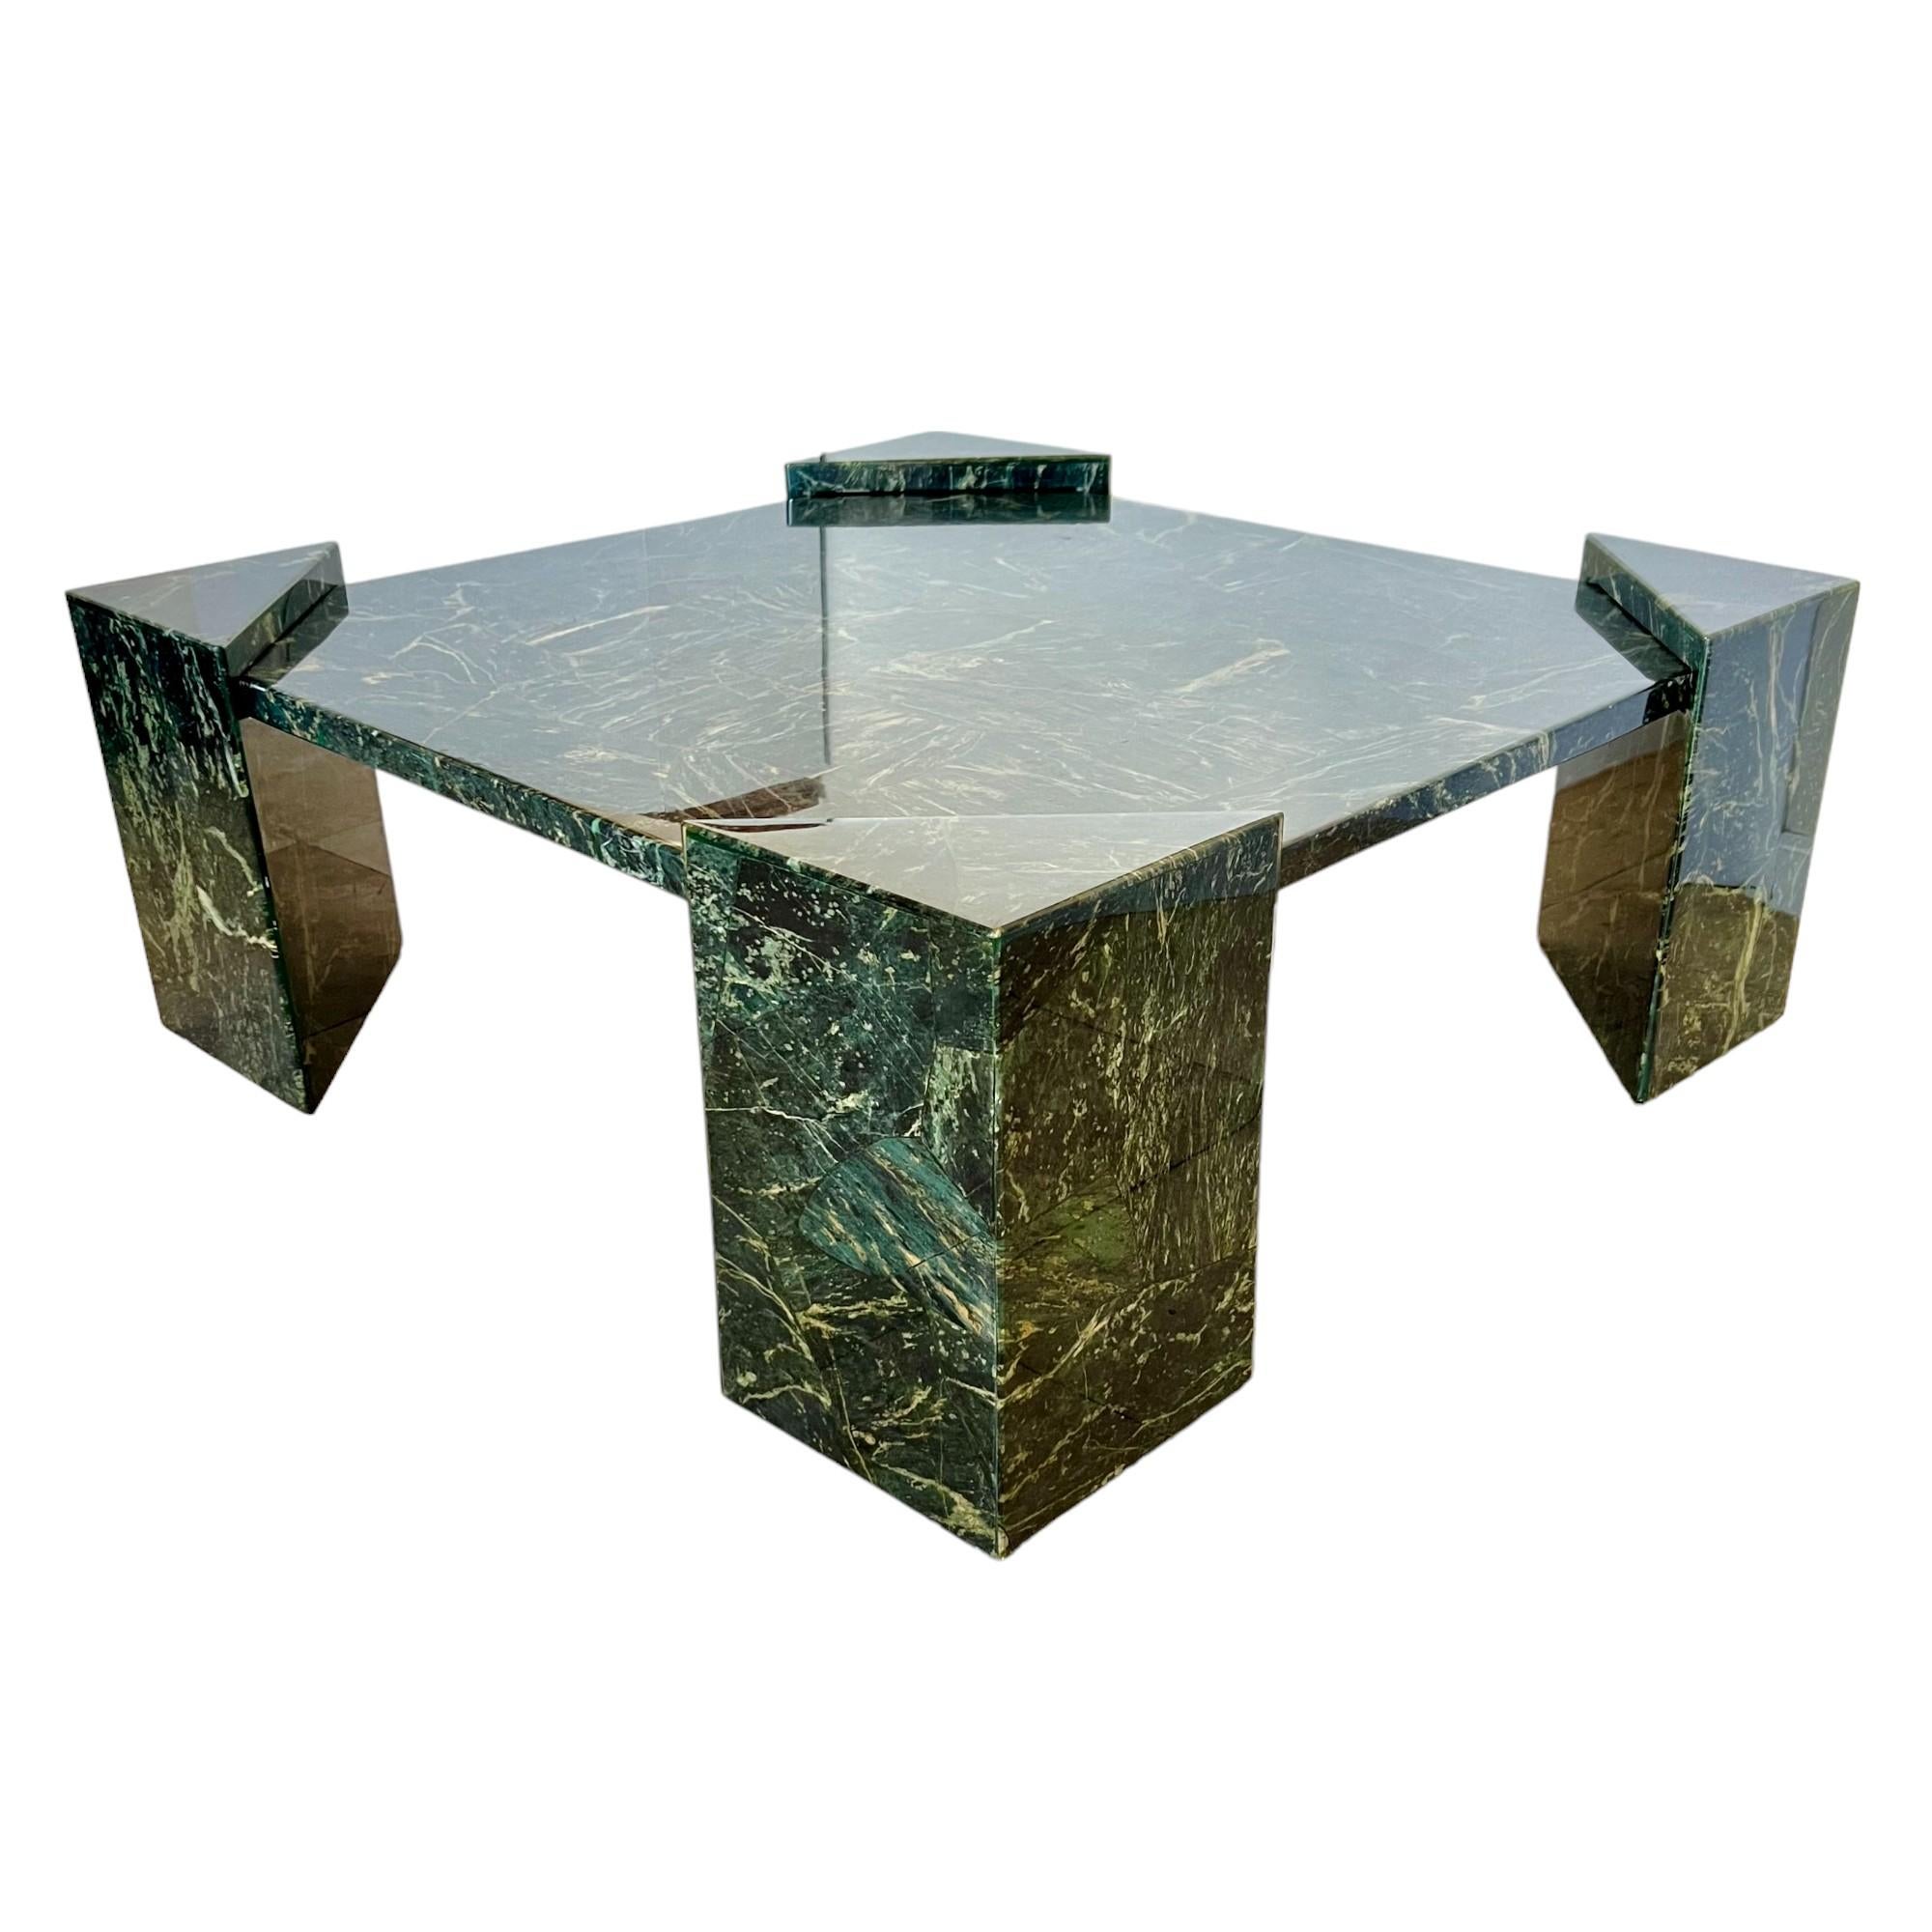 American Modernist Green Faux Marble Fiberglass Cocktail Table, 1980s For Sale